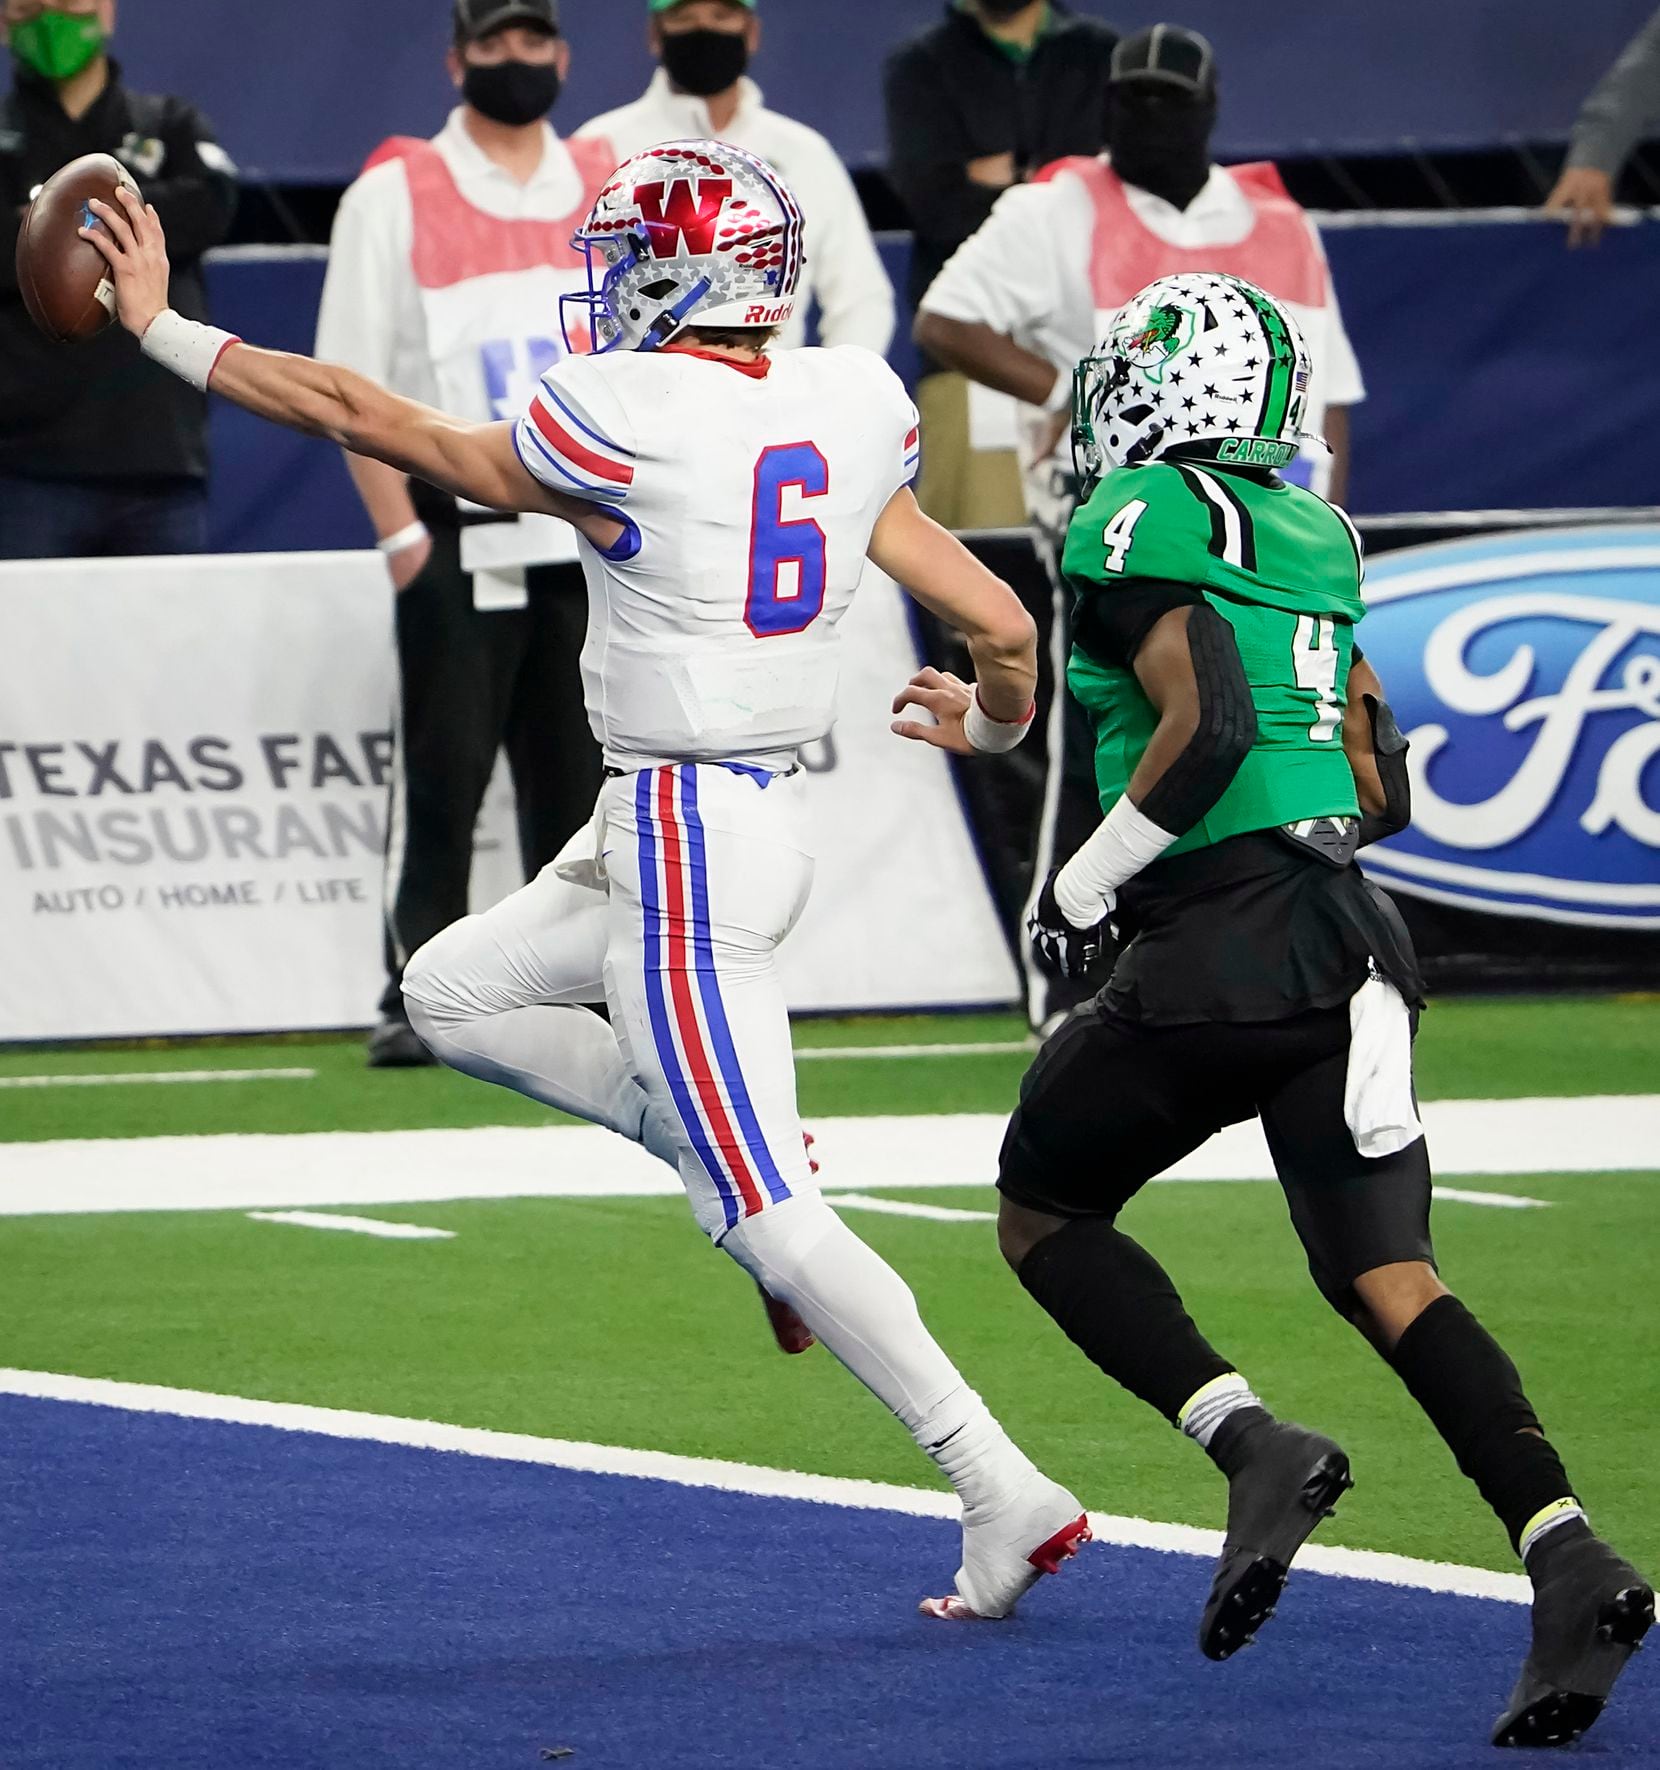 Austin Westlake quarterback Cade Klubnik (6) scores on a 1-yard touchdown run past Southlake Carroll defensive back Cinque Williams (4) during the second quarter of the Class 6A Division I state football championship game at AT&T Stadium on Saturday, Jan. 16, 2021, in Arlington, Texas.